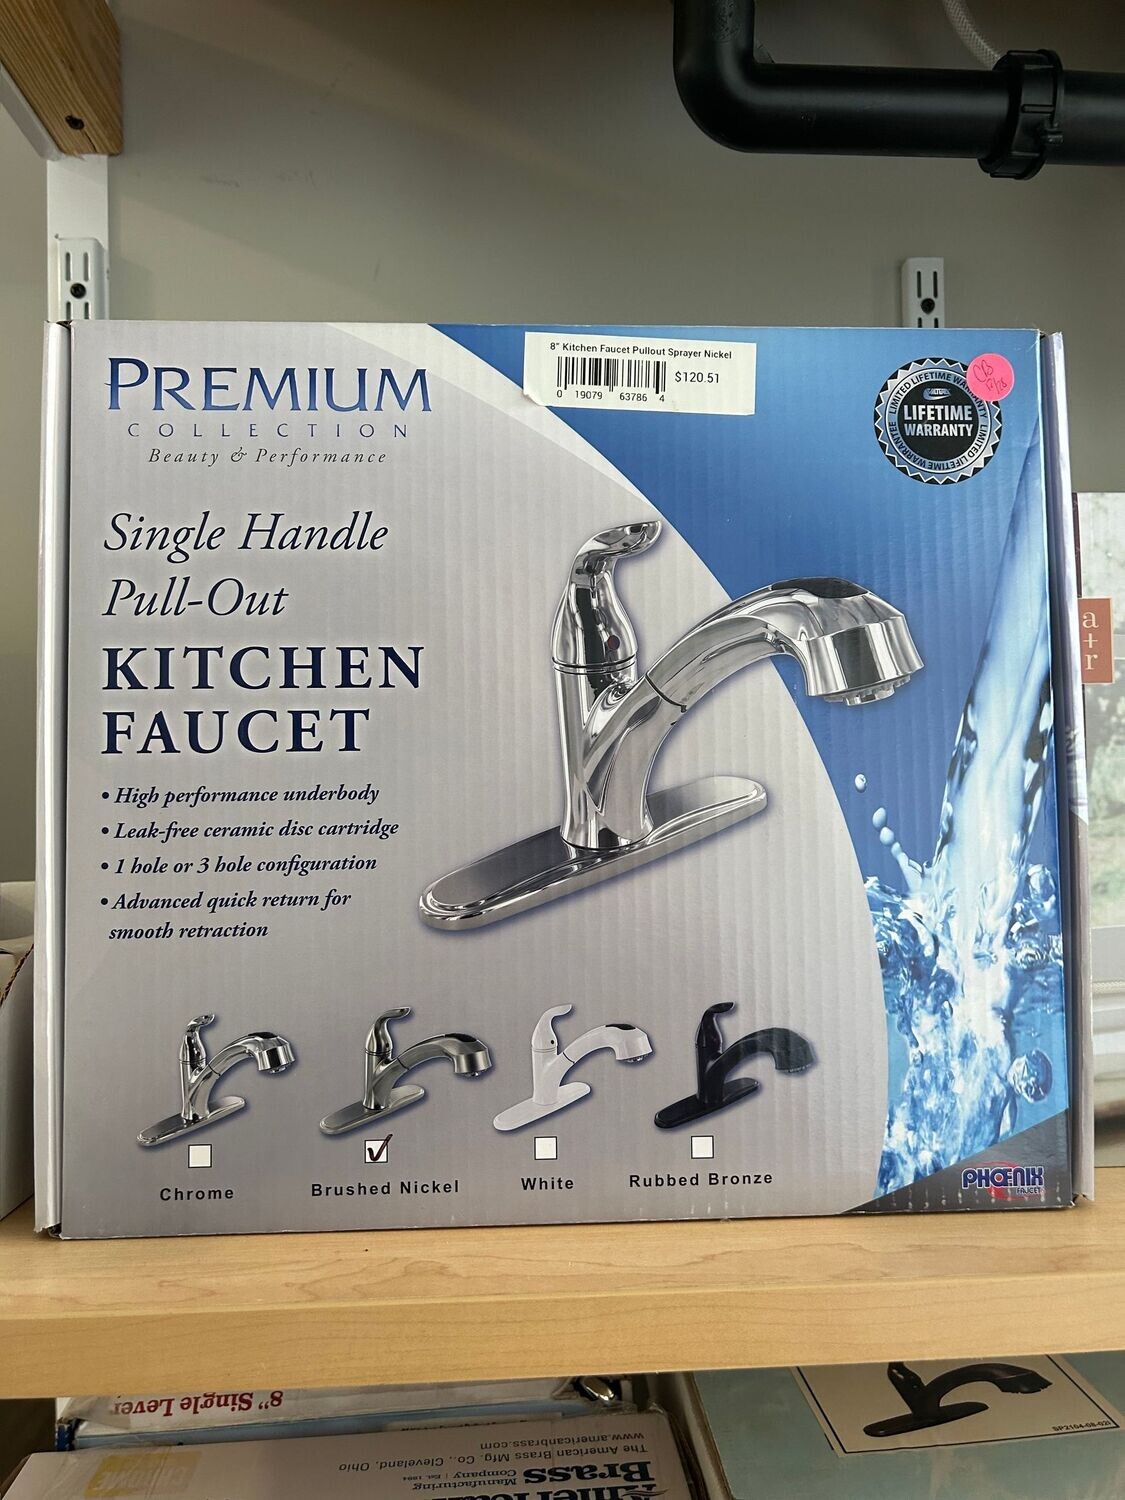 8" kitchen faucet pullout sprayer nickel